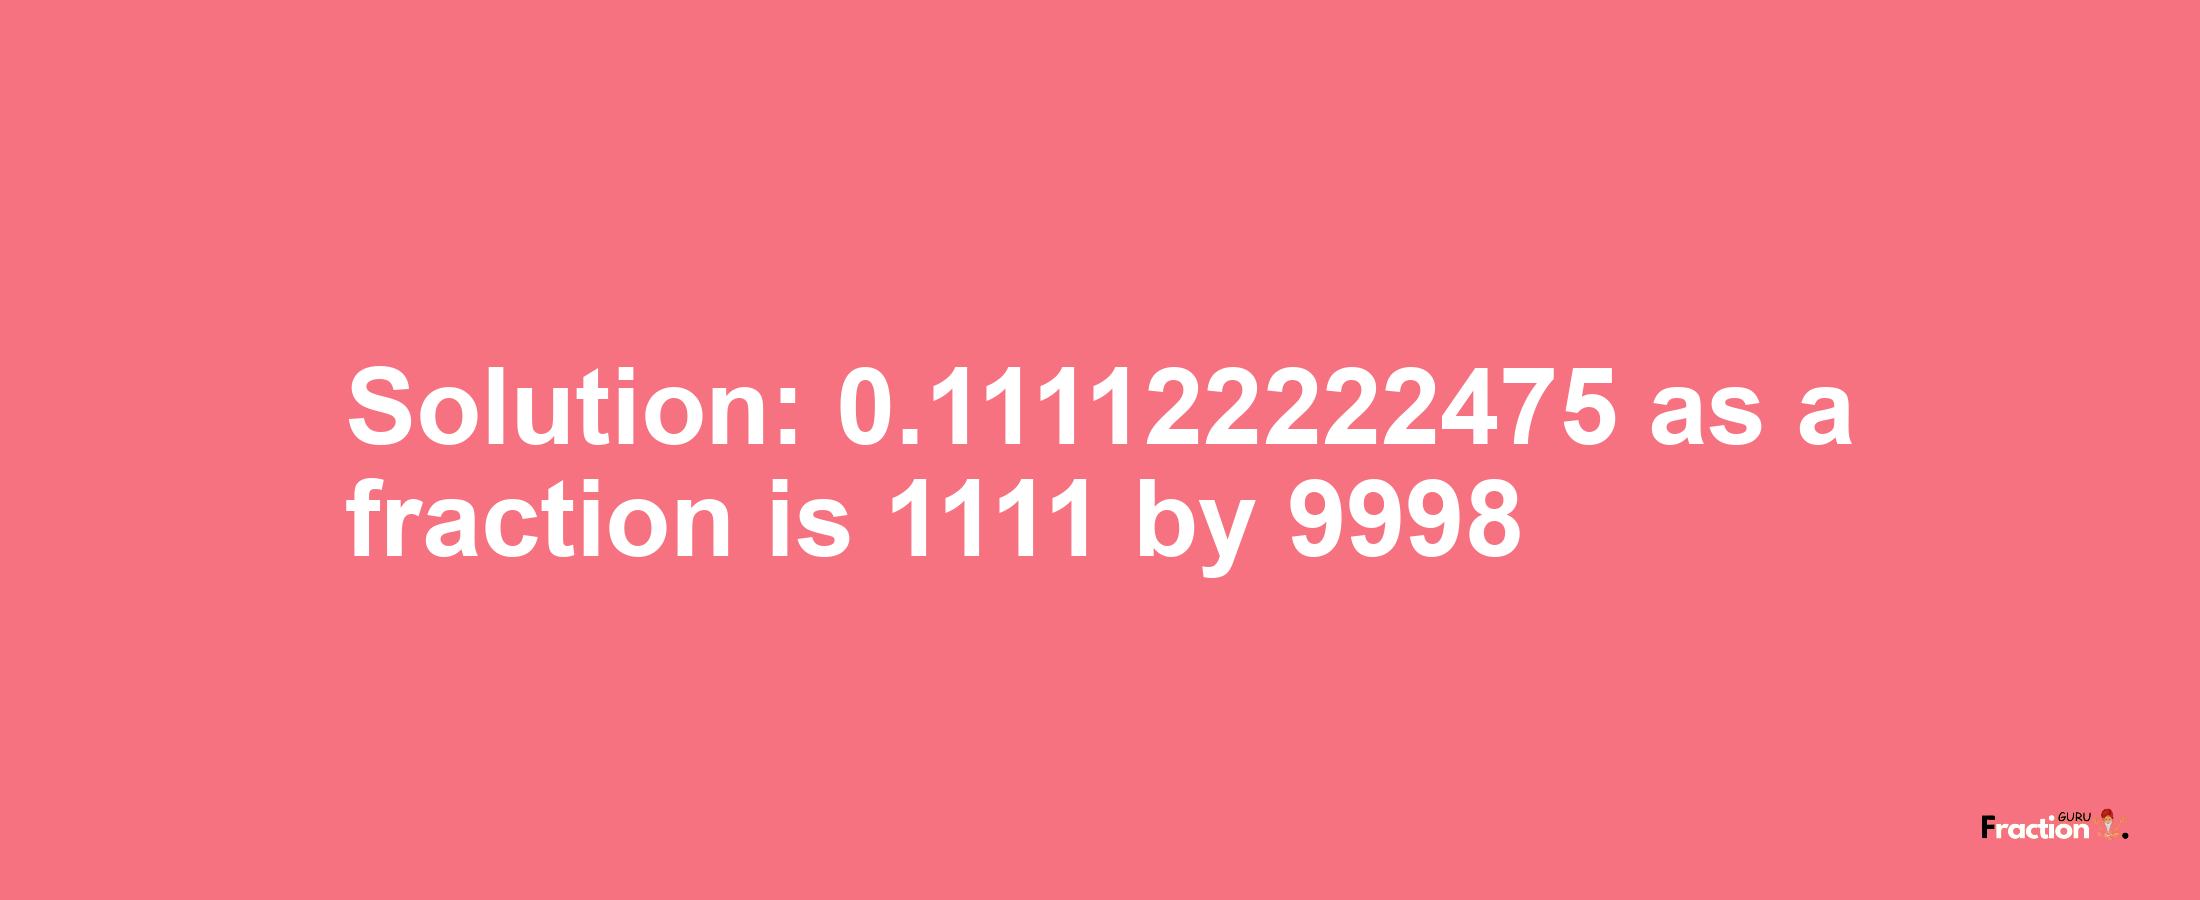 Solution:0.111122222475 as a fraction is 1111/9998